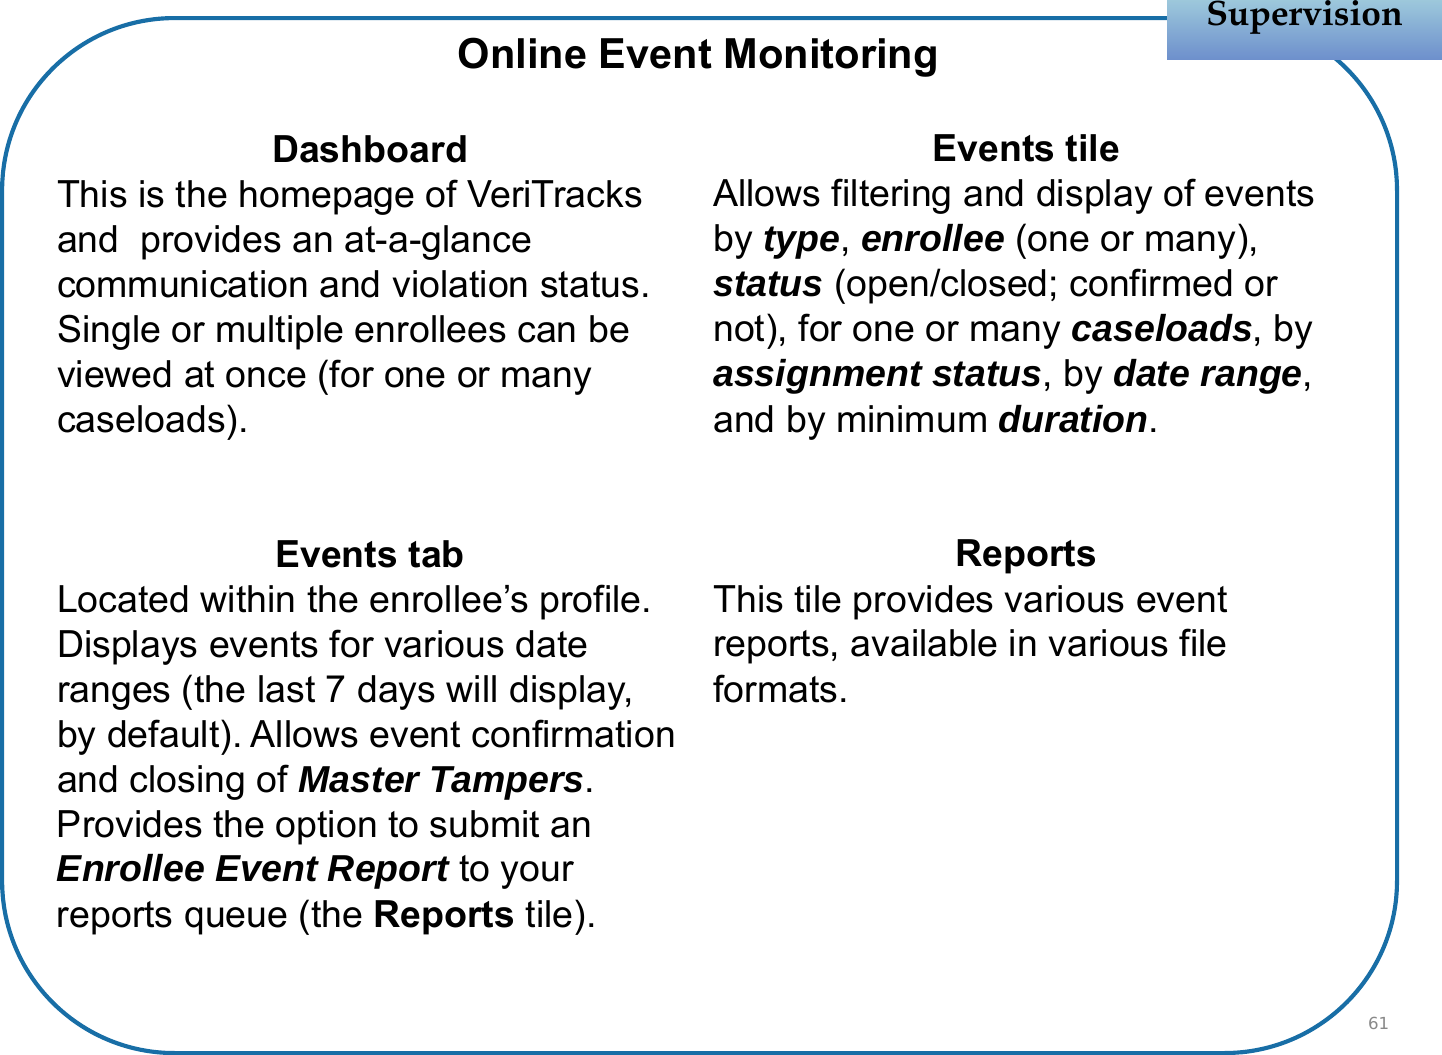 DashboardThis is the homepage of VeriTracks and  provides an at-a-glance communication and violation status. Single or multiple enrollees can be viewed at once (for one or many caseloads).Events tabLocated within the enrollee’s profile. Displays events for various date ranges (the last 7 days will display, by default). Allows event confirmation and closing of Master Tampers. Provides the option to submit an Enrollee Event Report to your reports queue (the Reports tile).Events tileAllows filtering and display of events by type, enrollee (one or many), status (open/closed; confirmed or not), for one or many caseloads, by assignment status, by date range, and by minimum duration.ReportsThis tile provides various event reports, available in various file formats.SupervisionSupervision61Online Event Monitoring